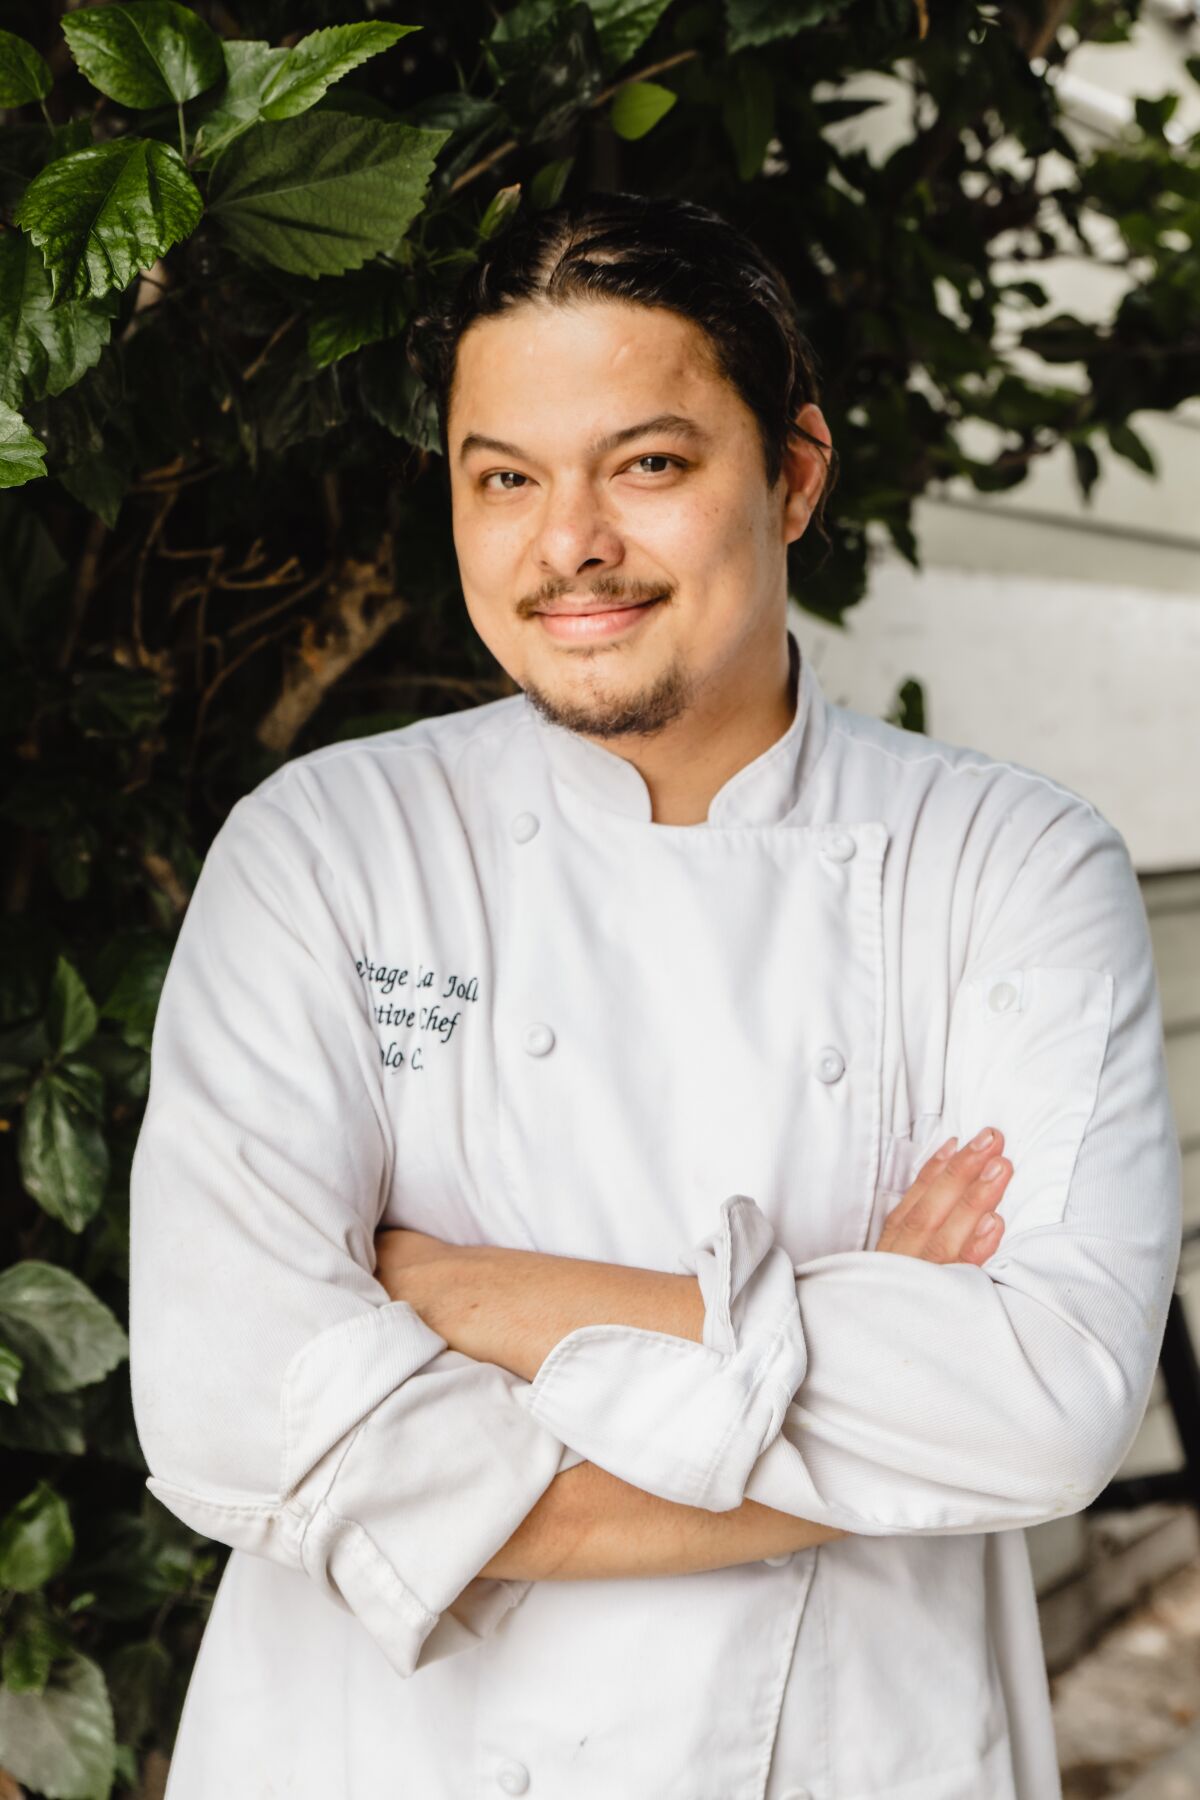 The Cottage in La Jolla will present a pop-up dining event with executive chef Paolo Chan on Friday, May 19.